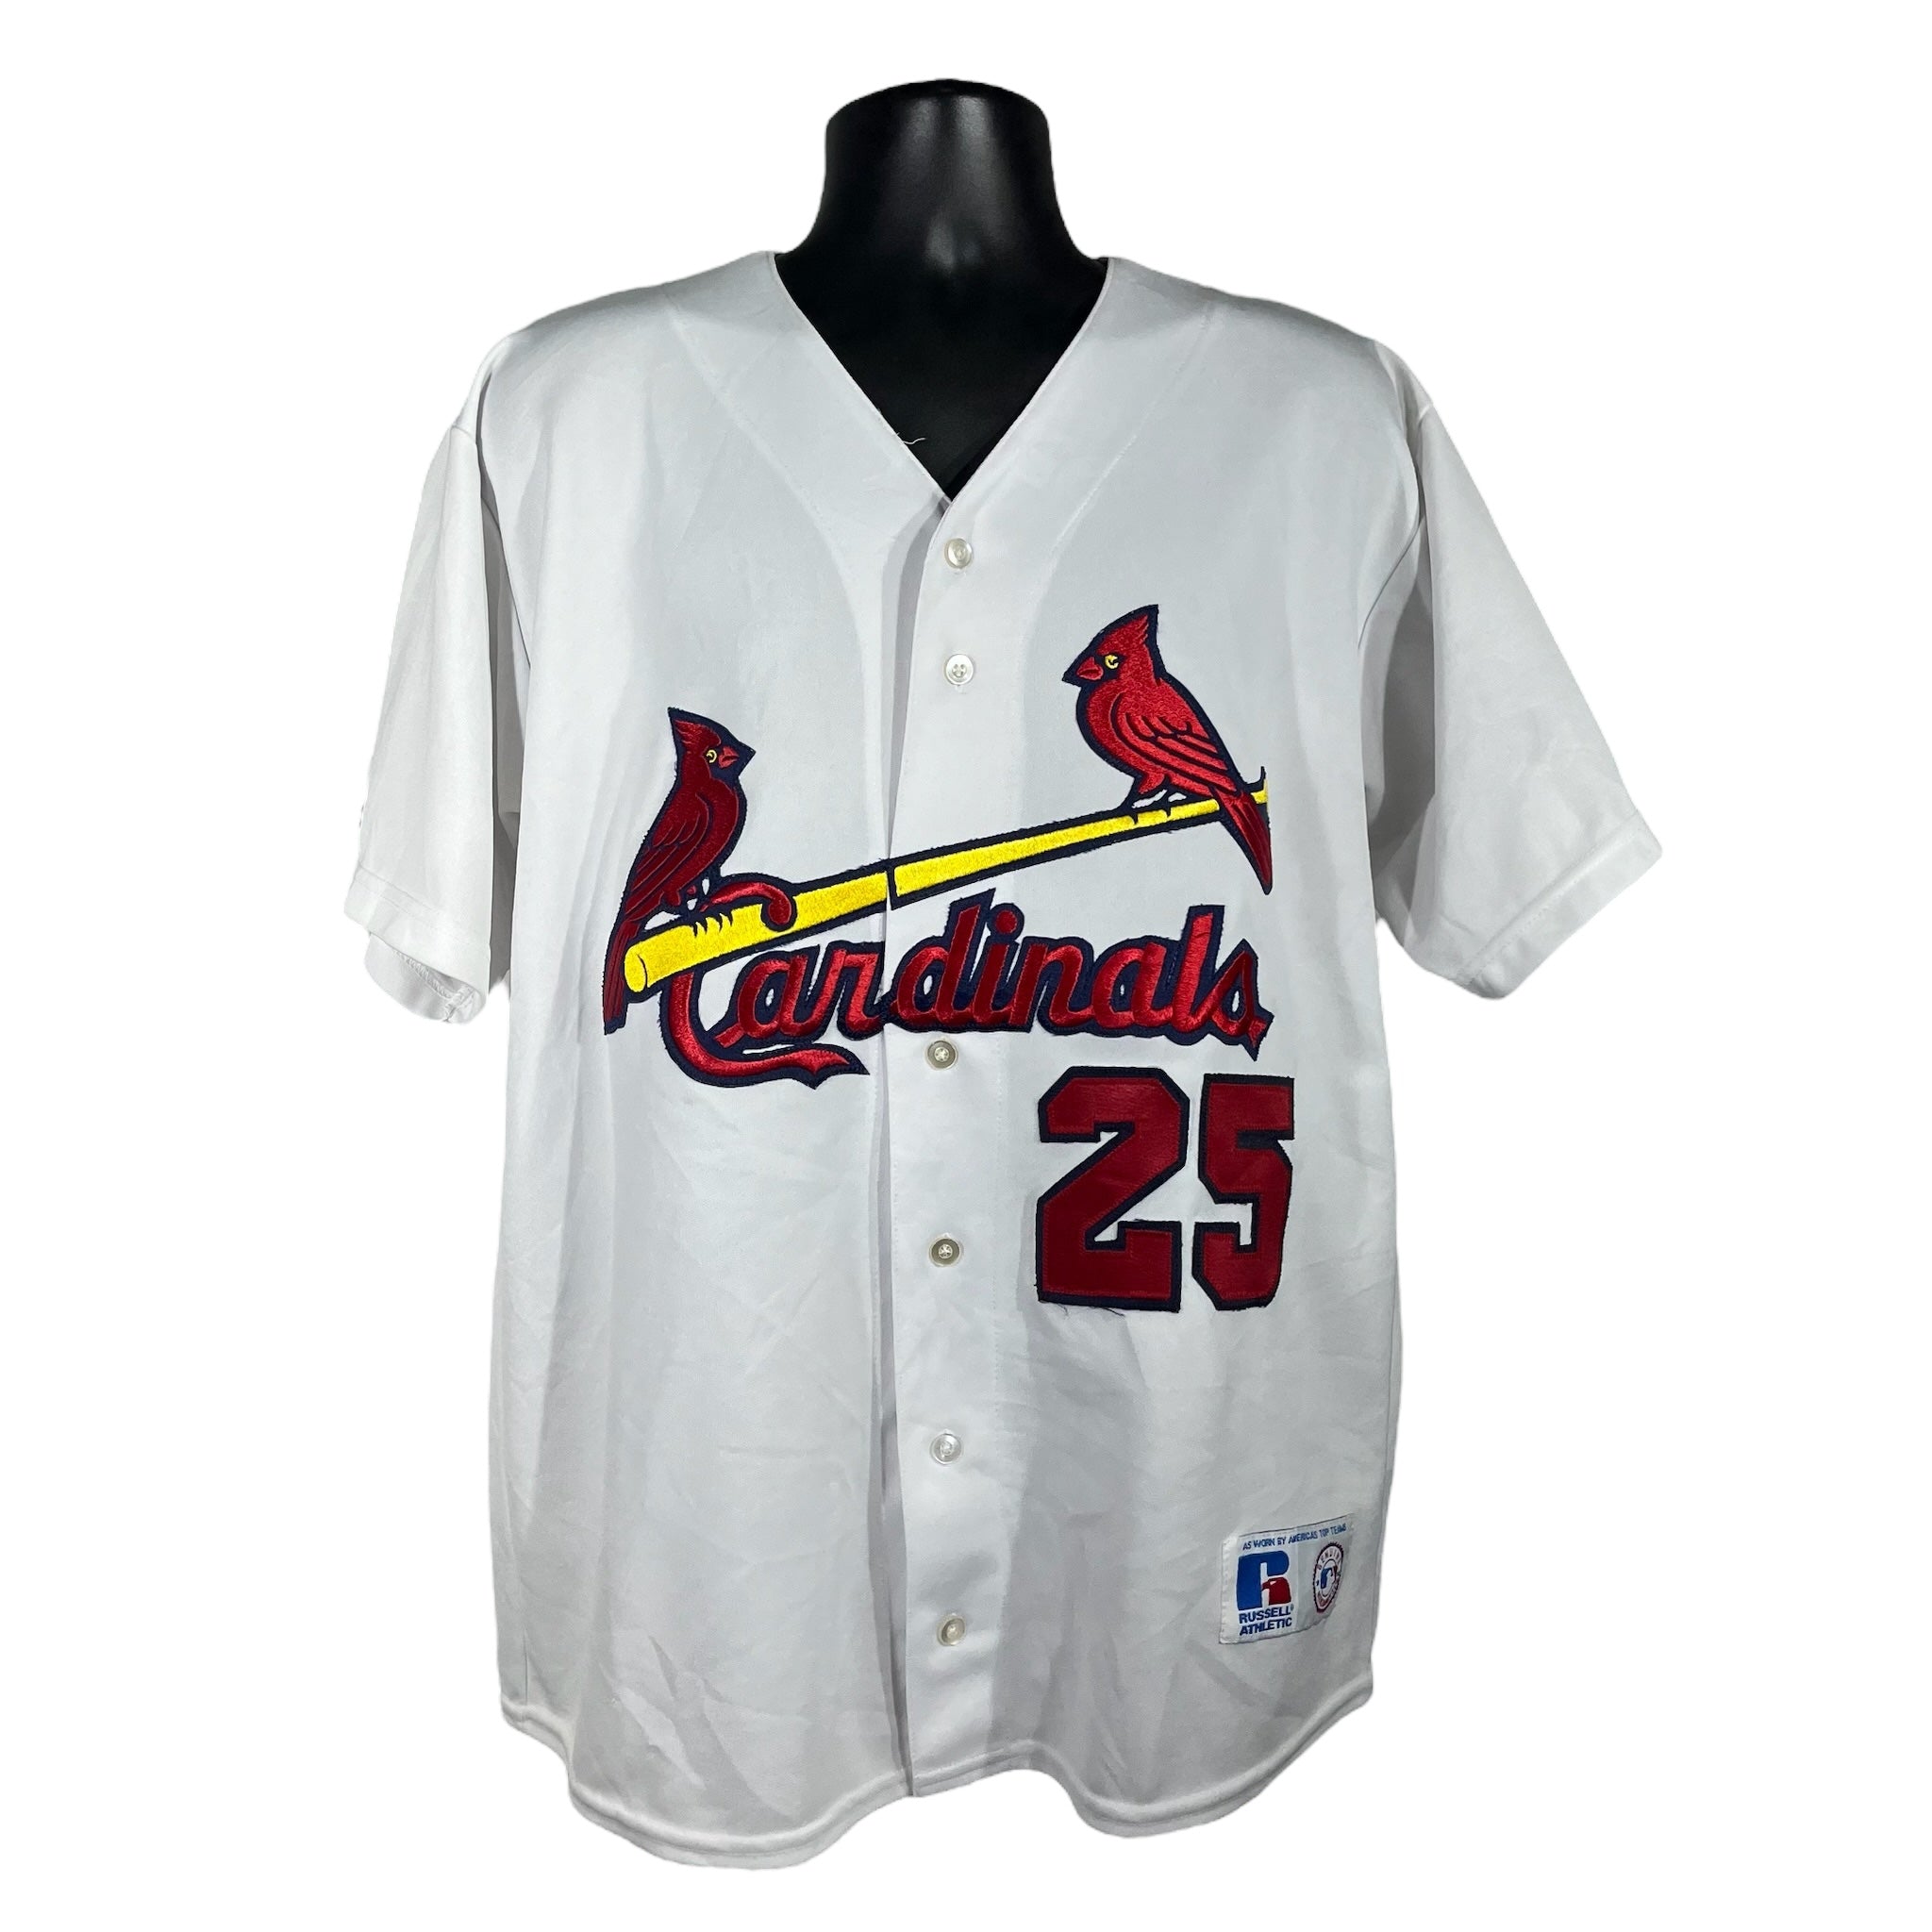 Vintage St. Louis Cardinals Mark McGwire #25 Russell Jersey 90s